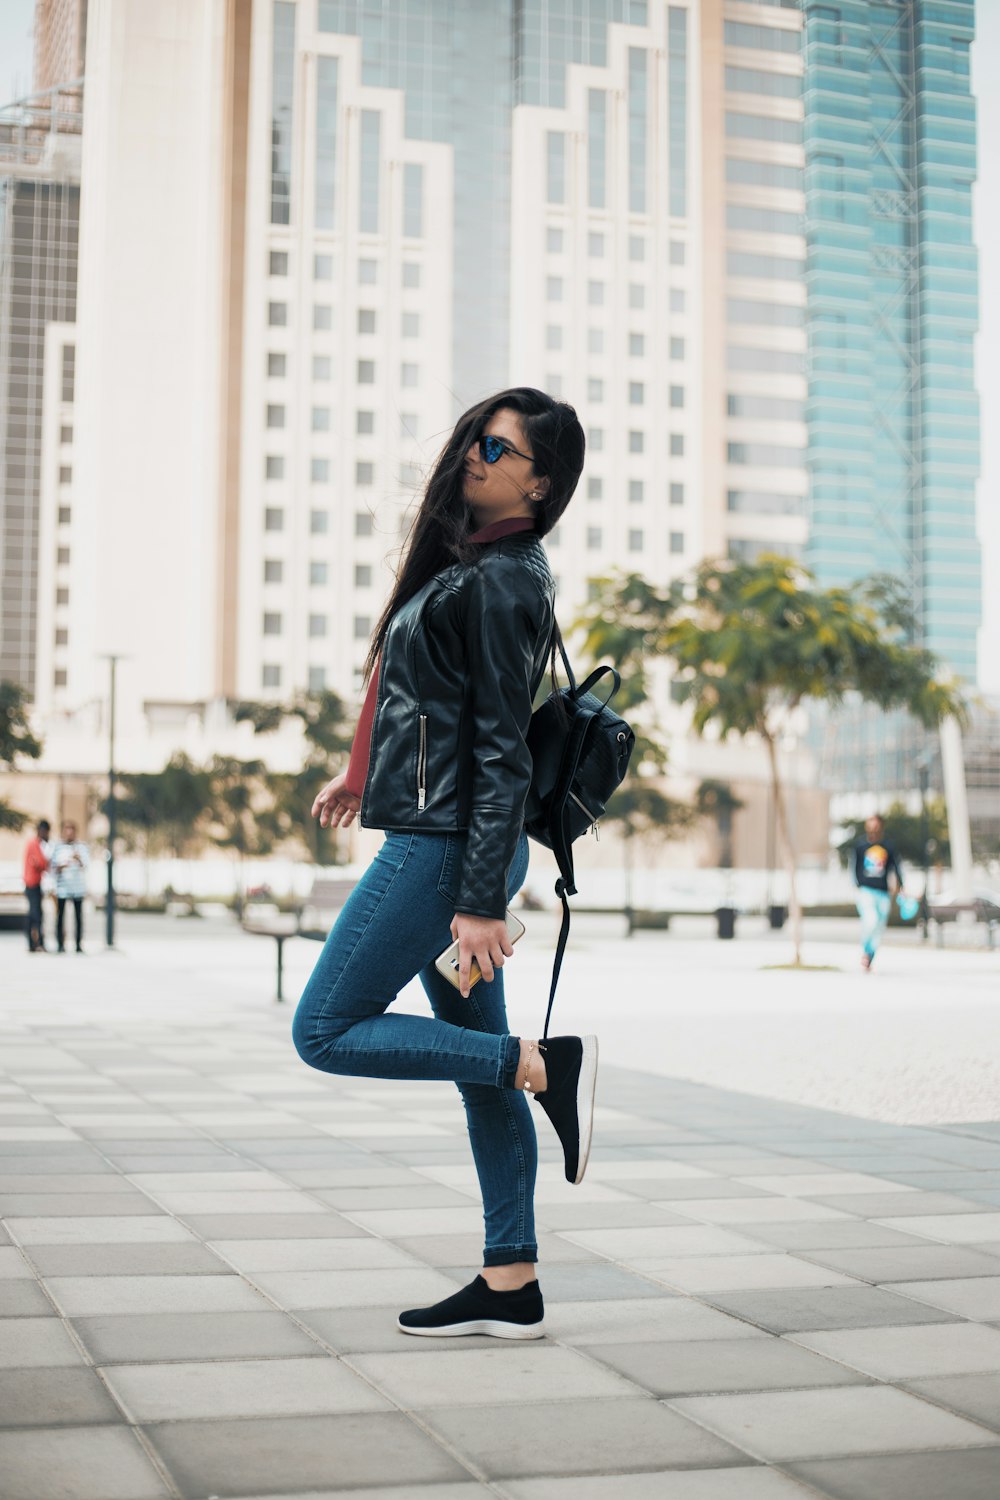 Woman in black jacket and blue denim jeans standing on sidewalk during  daytime photo – Free Sneakers Image on Unsplash